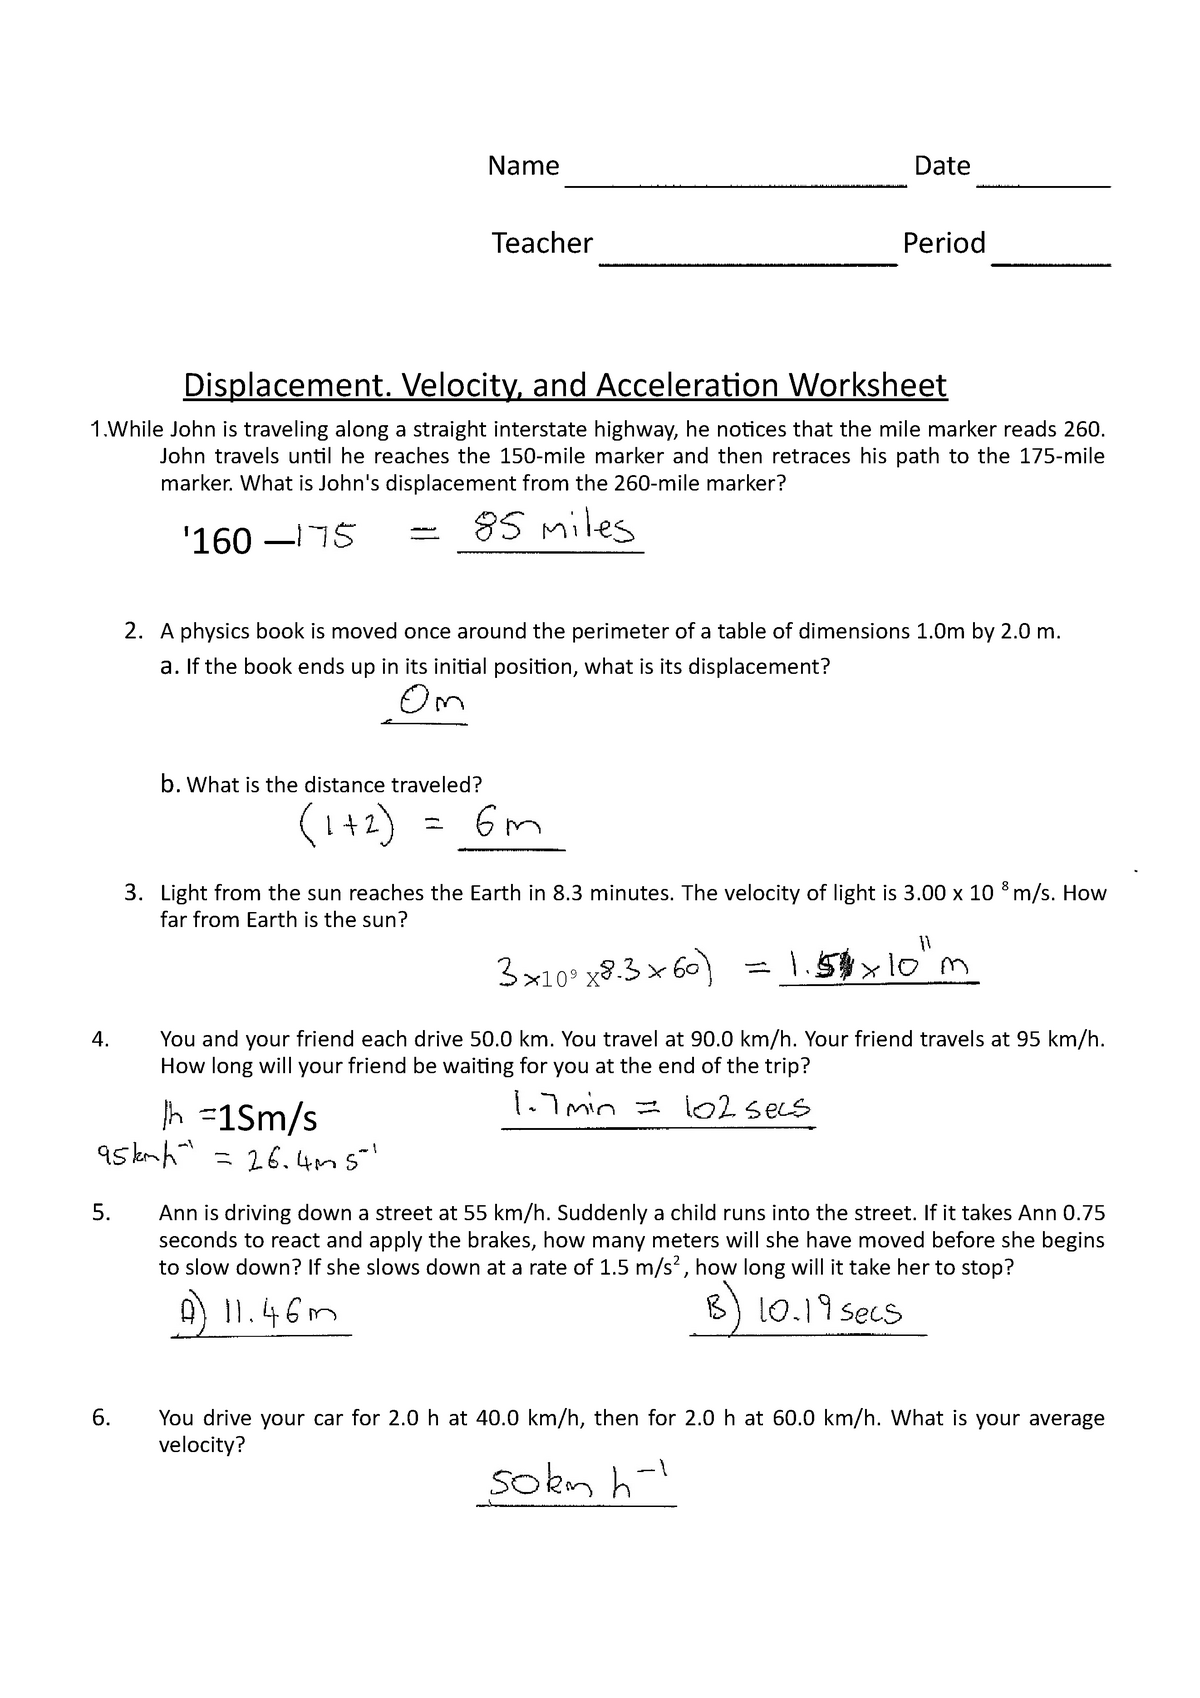 Kinematics Questions AND Solutions - Name Date Teacher Period Within Displacement And Velocity Worksheet